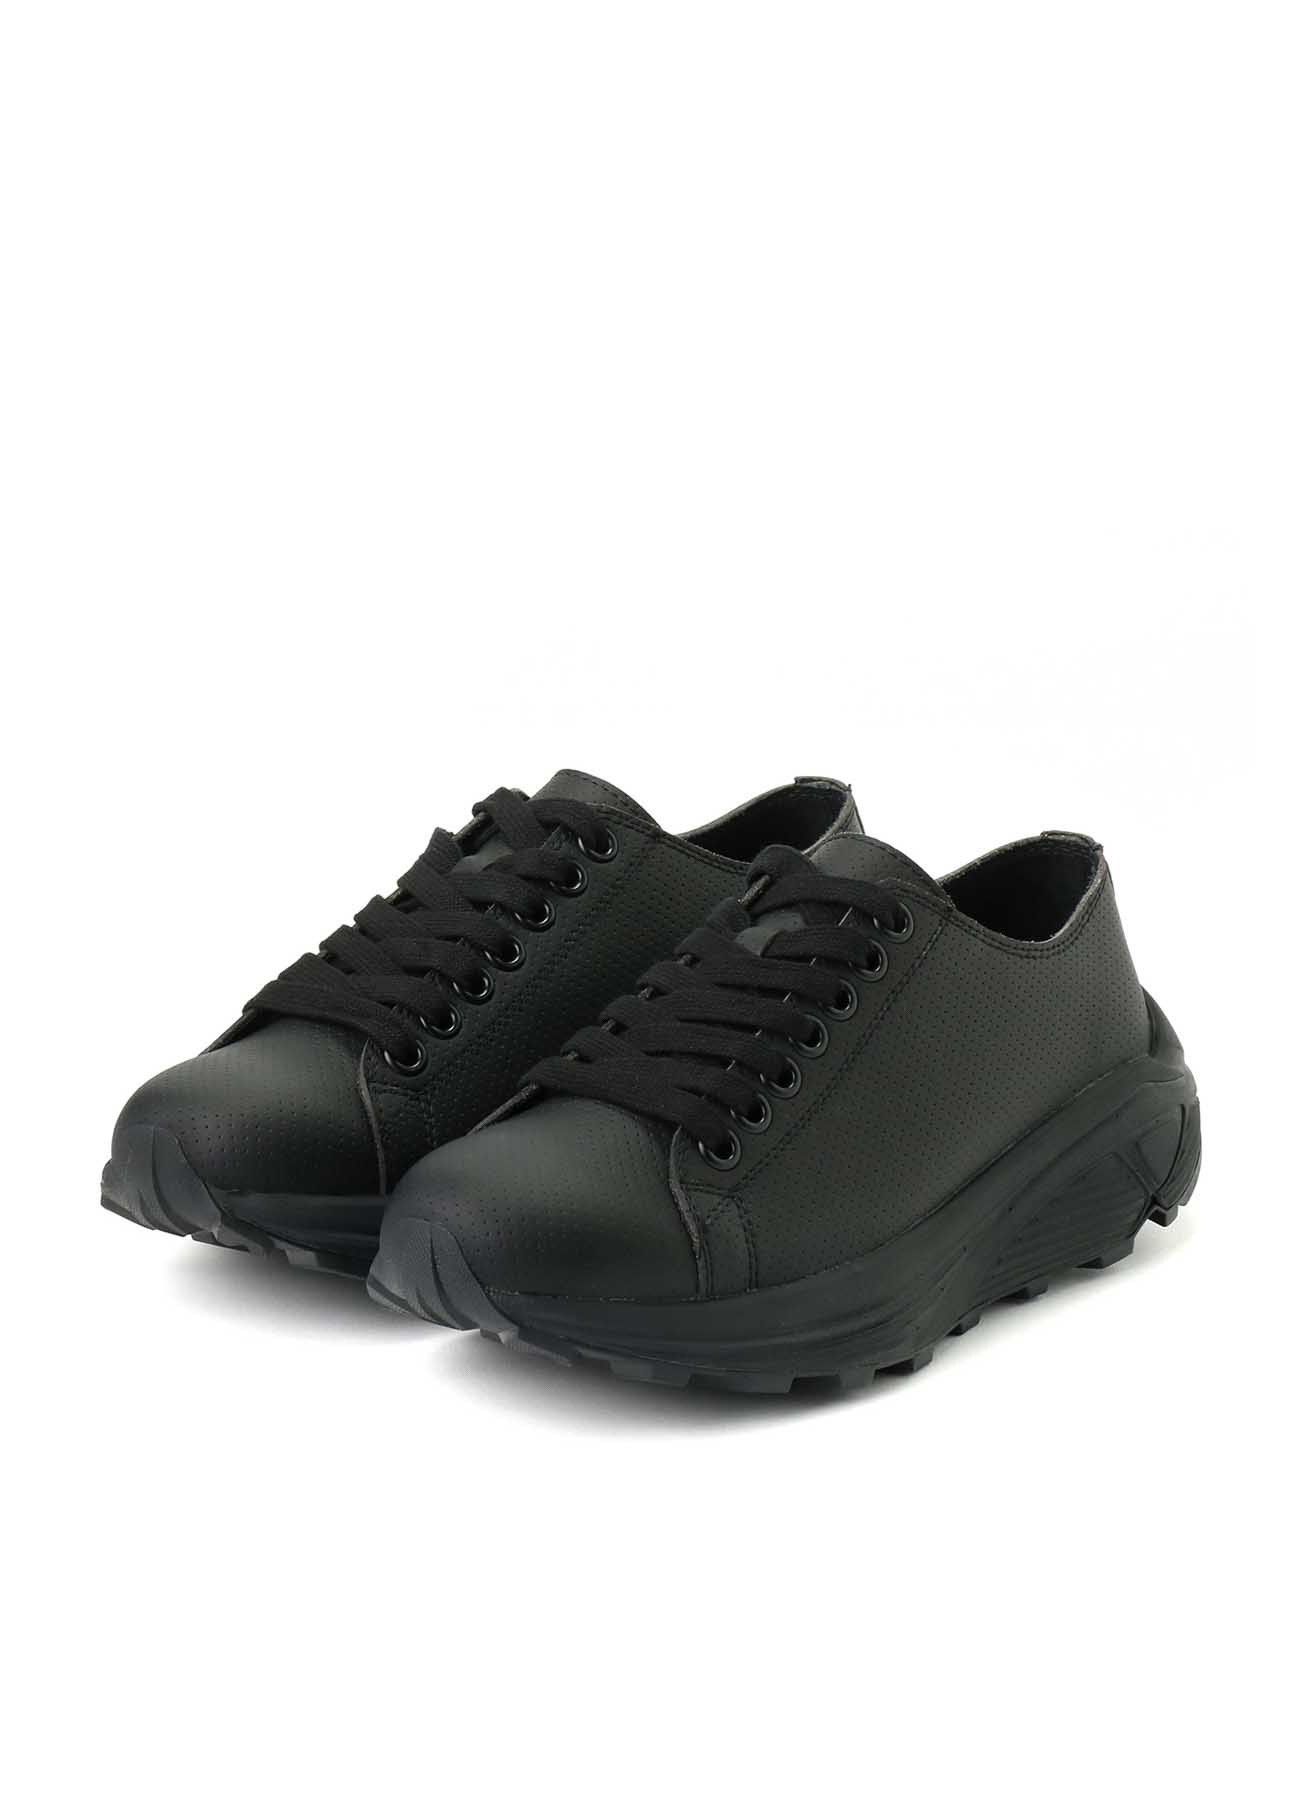 PU/PUNCHING LOW TOP LACE UP SHOES